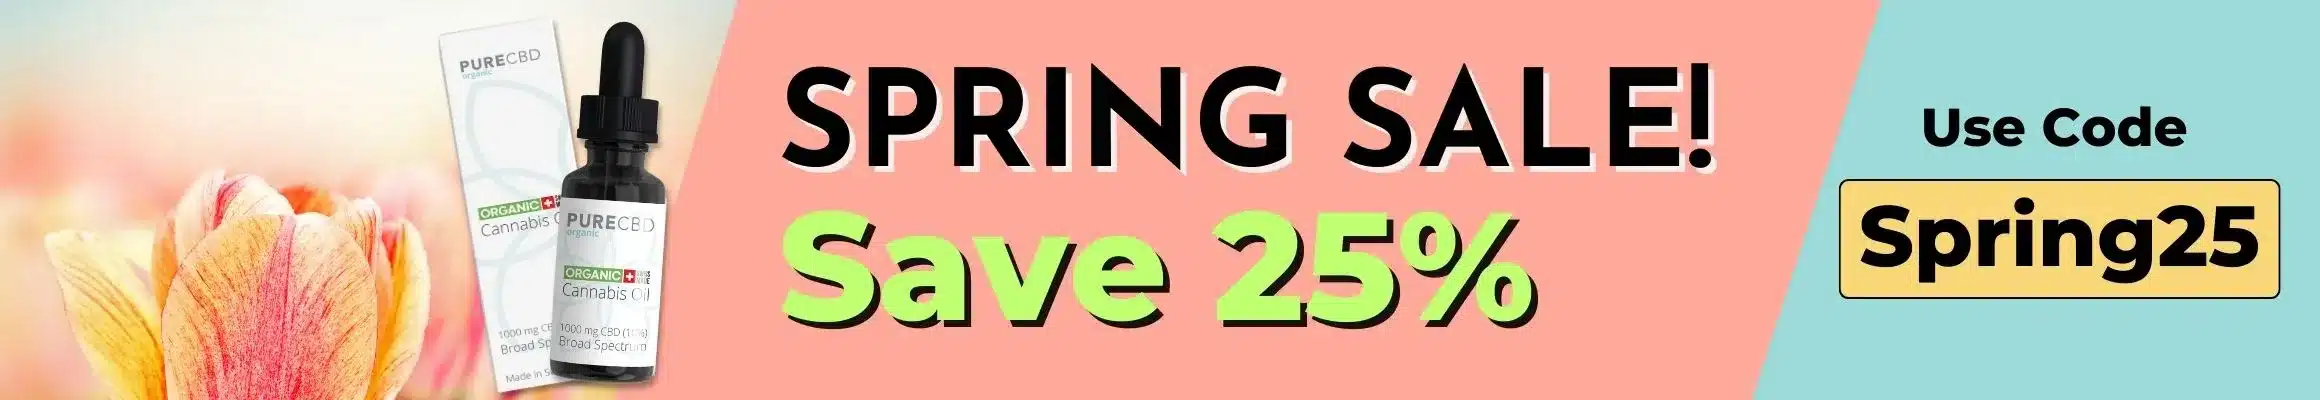 Spring 2023 sale! Save 25% on select CBD oils from now until April 5th! Shop Now!